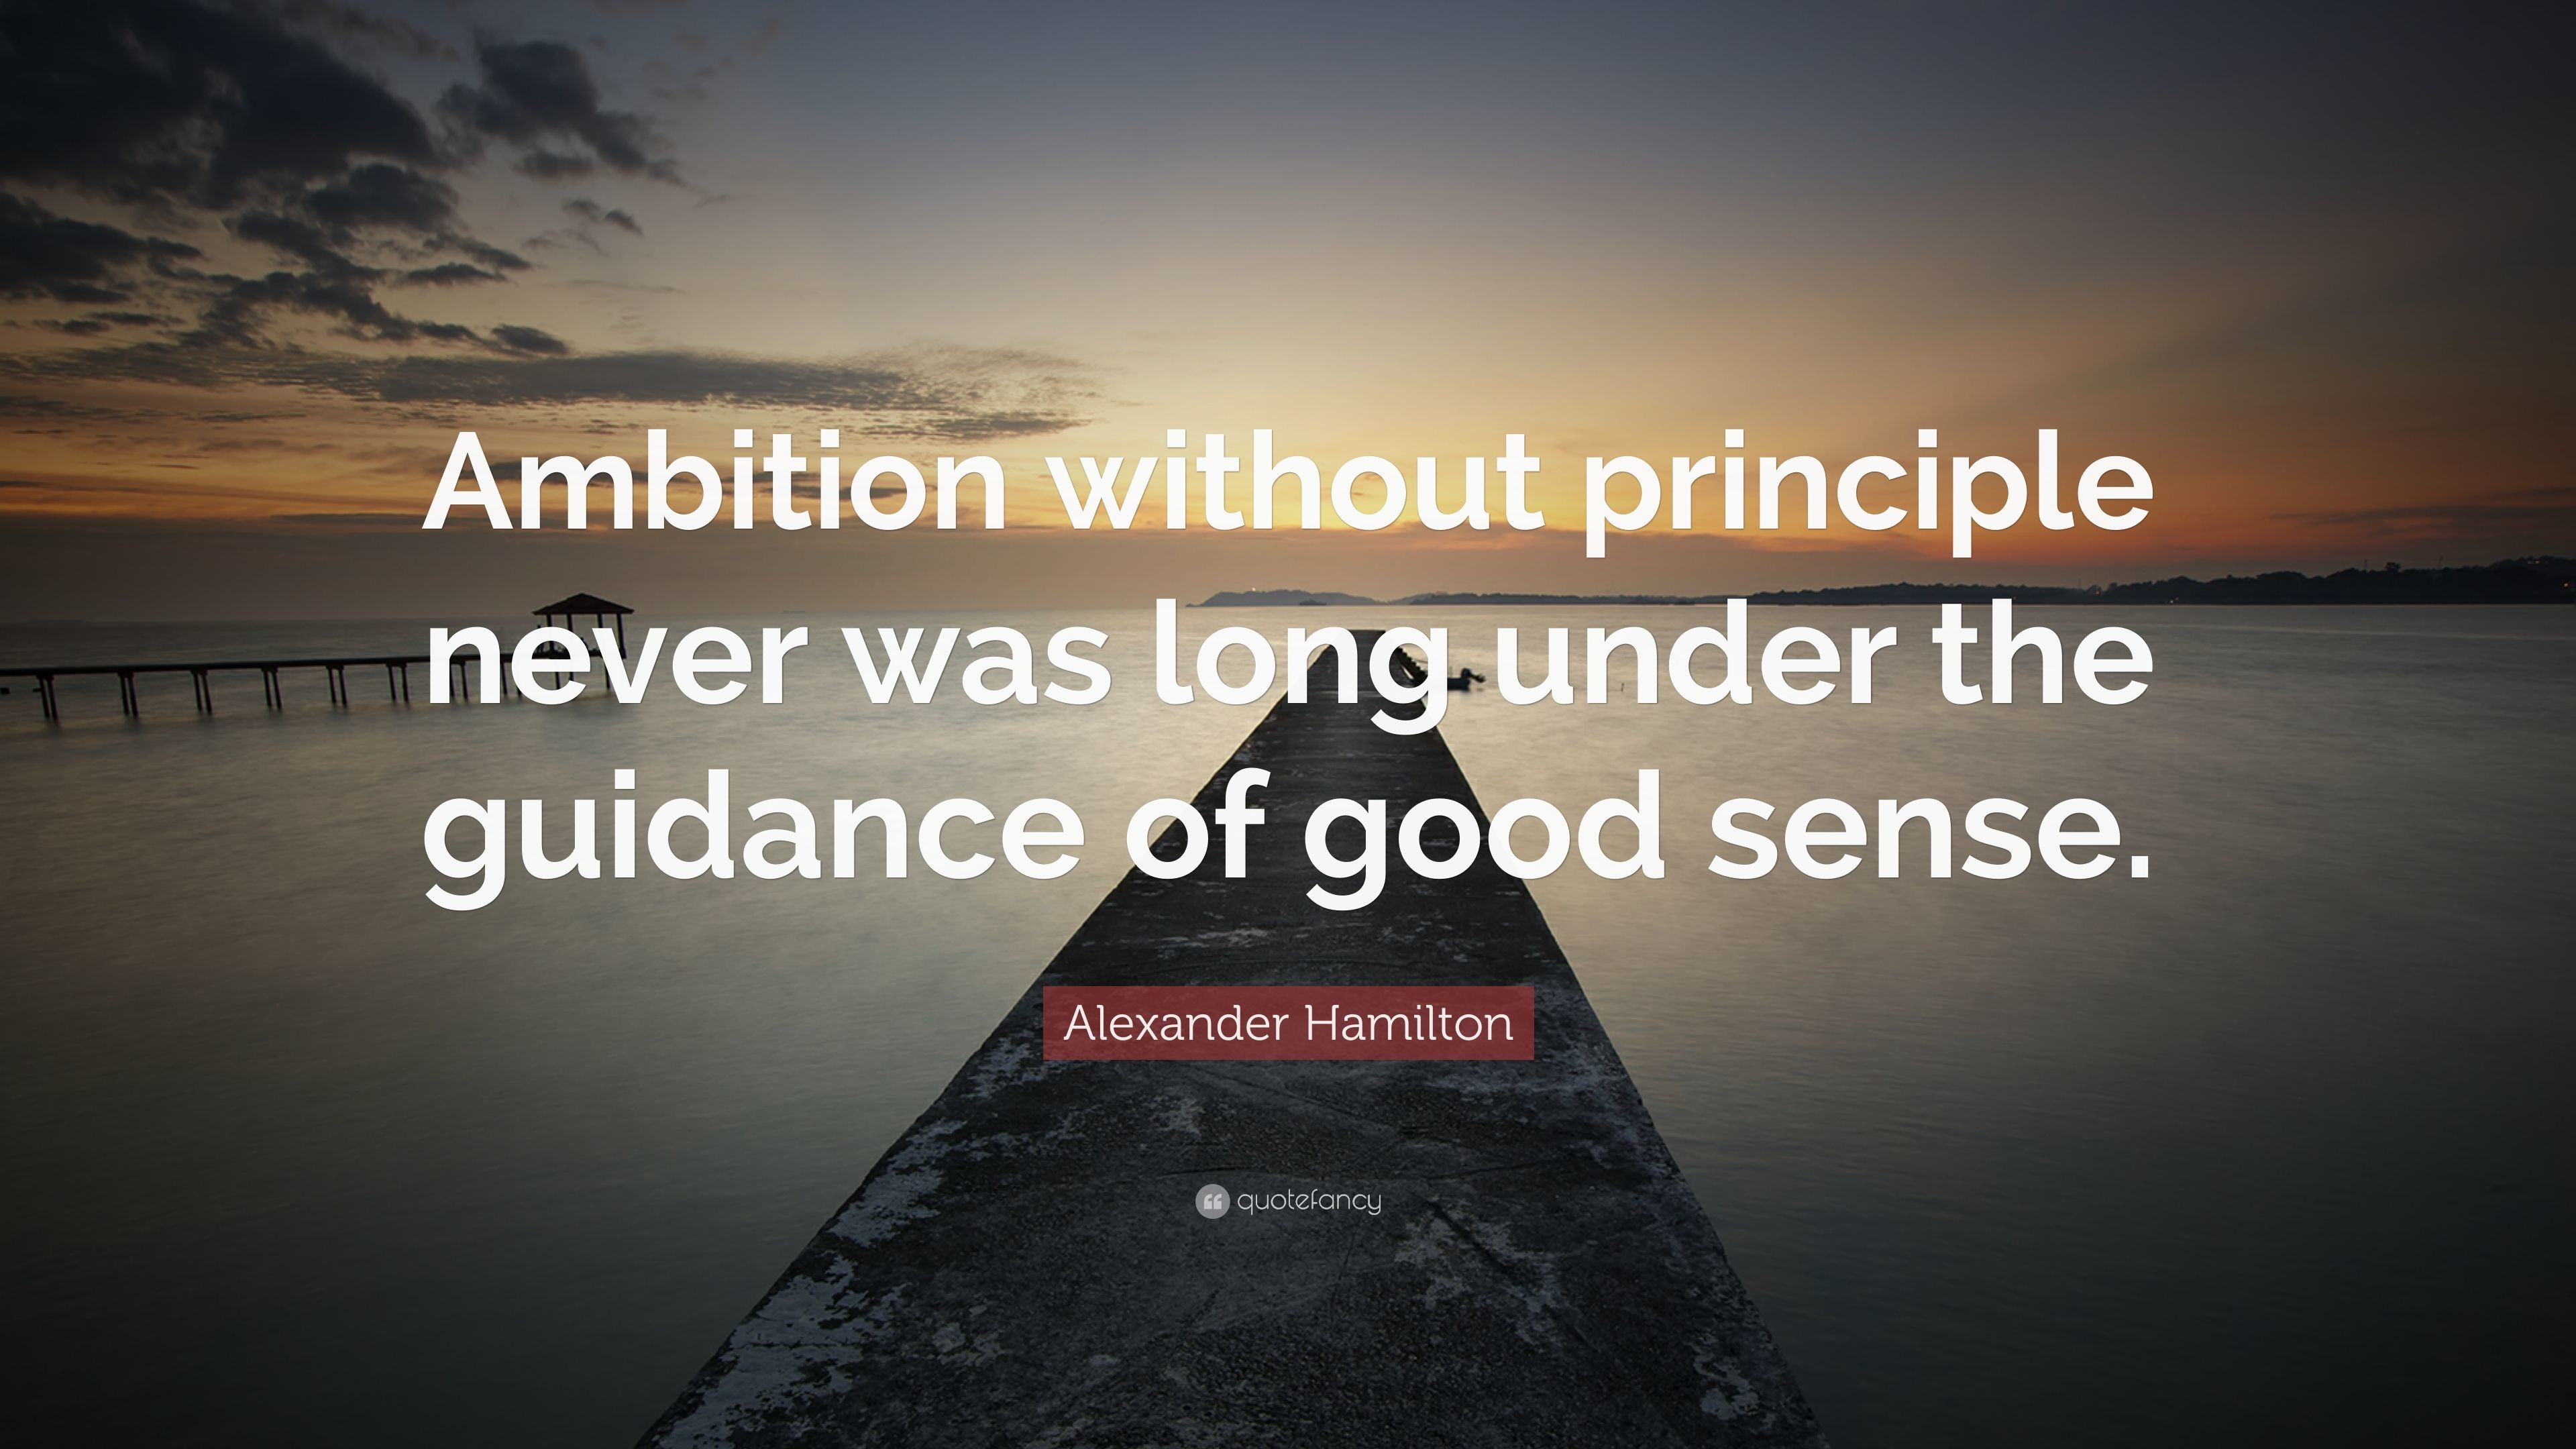 Alexander Hamilton Quote Ambition without principle never was long under the guidance of good